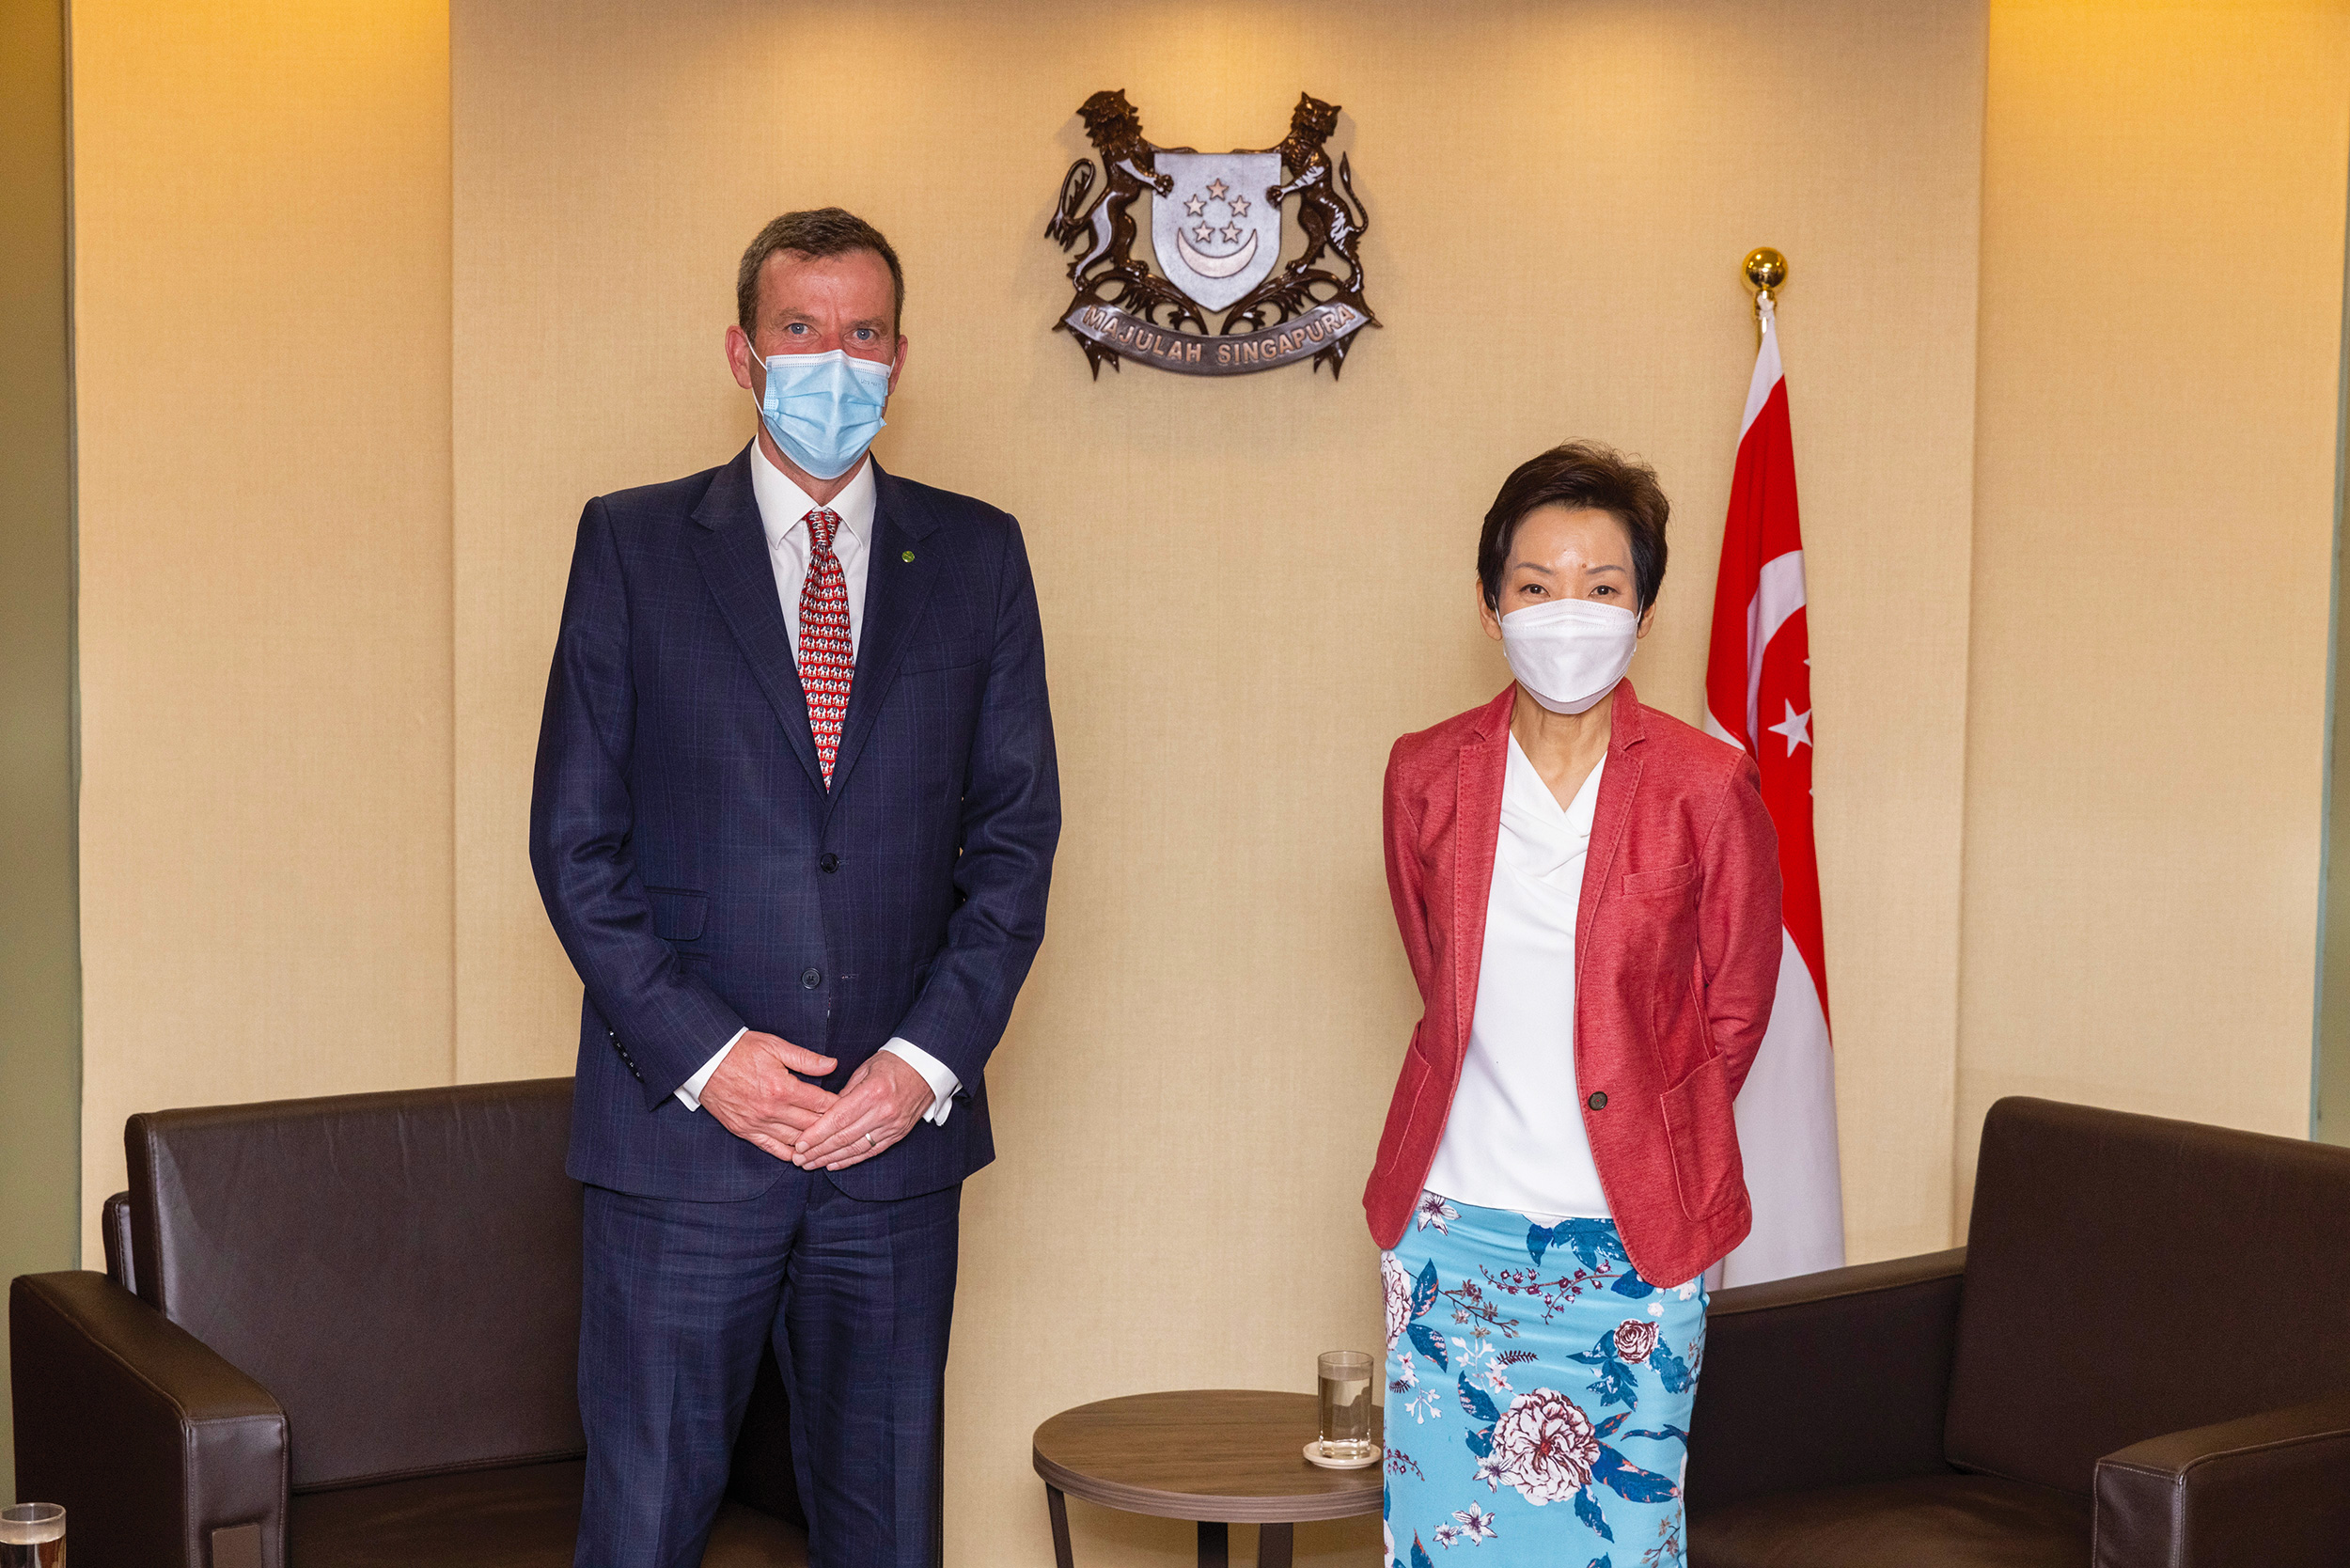 Australia’s Trade Minister Dan Tehan MP and Singapore’s Sustainability and the Environment Minister Grace Fu